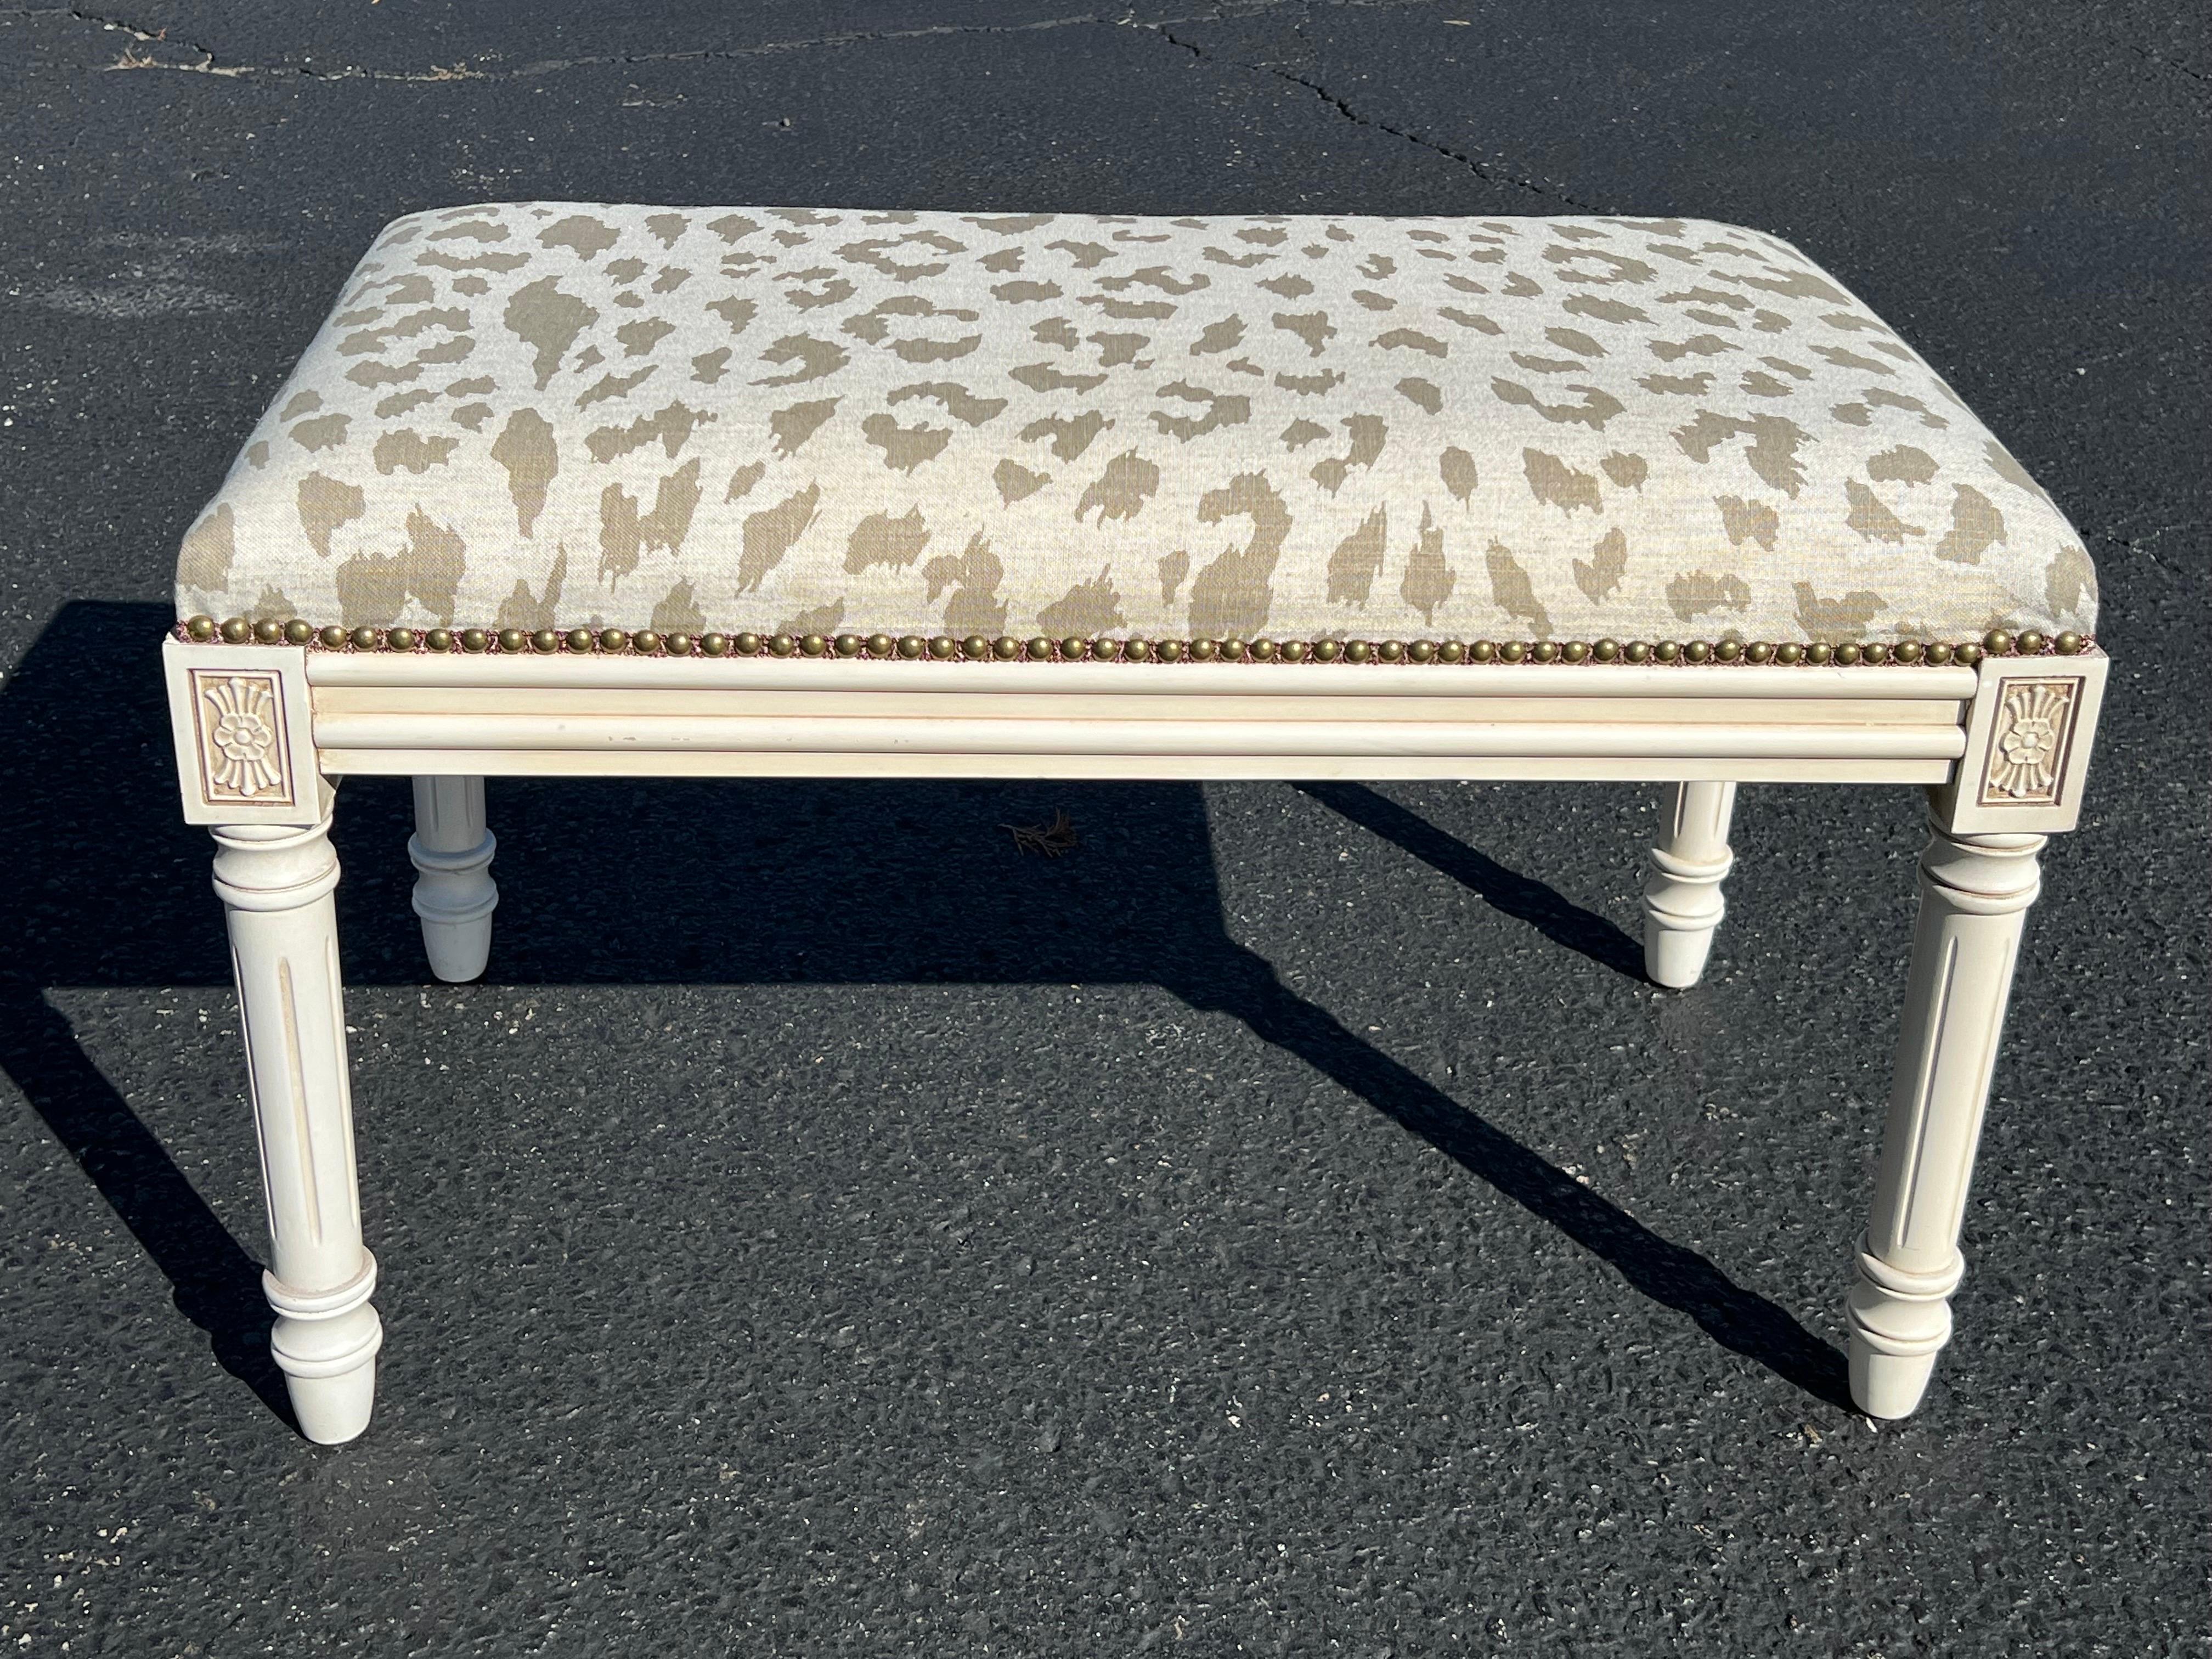 Upholstered bench with animal print upholstery. Nice cream painted stool base with brass beaded nails. Cream and tan animal print upholstery covers this traditional bench. Use at the foot of a bed or under a console.